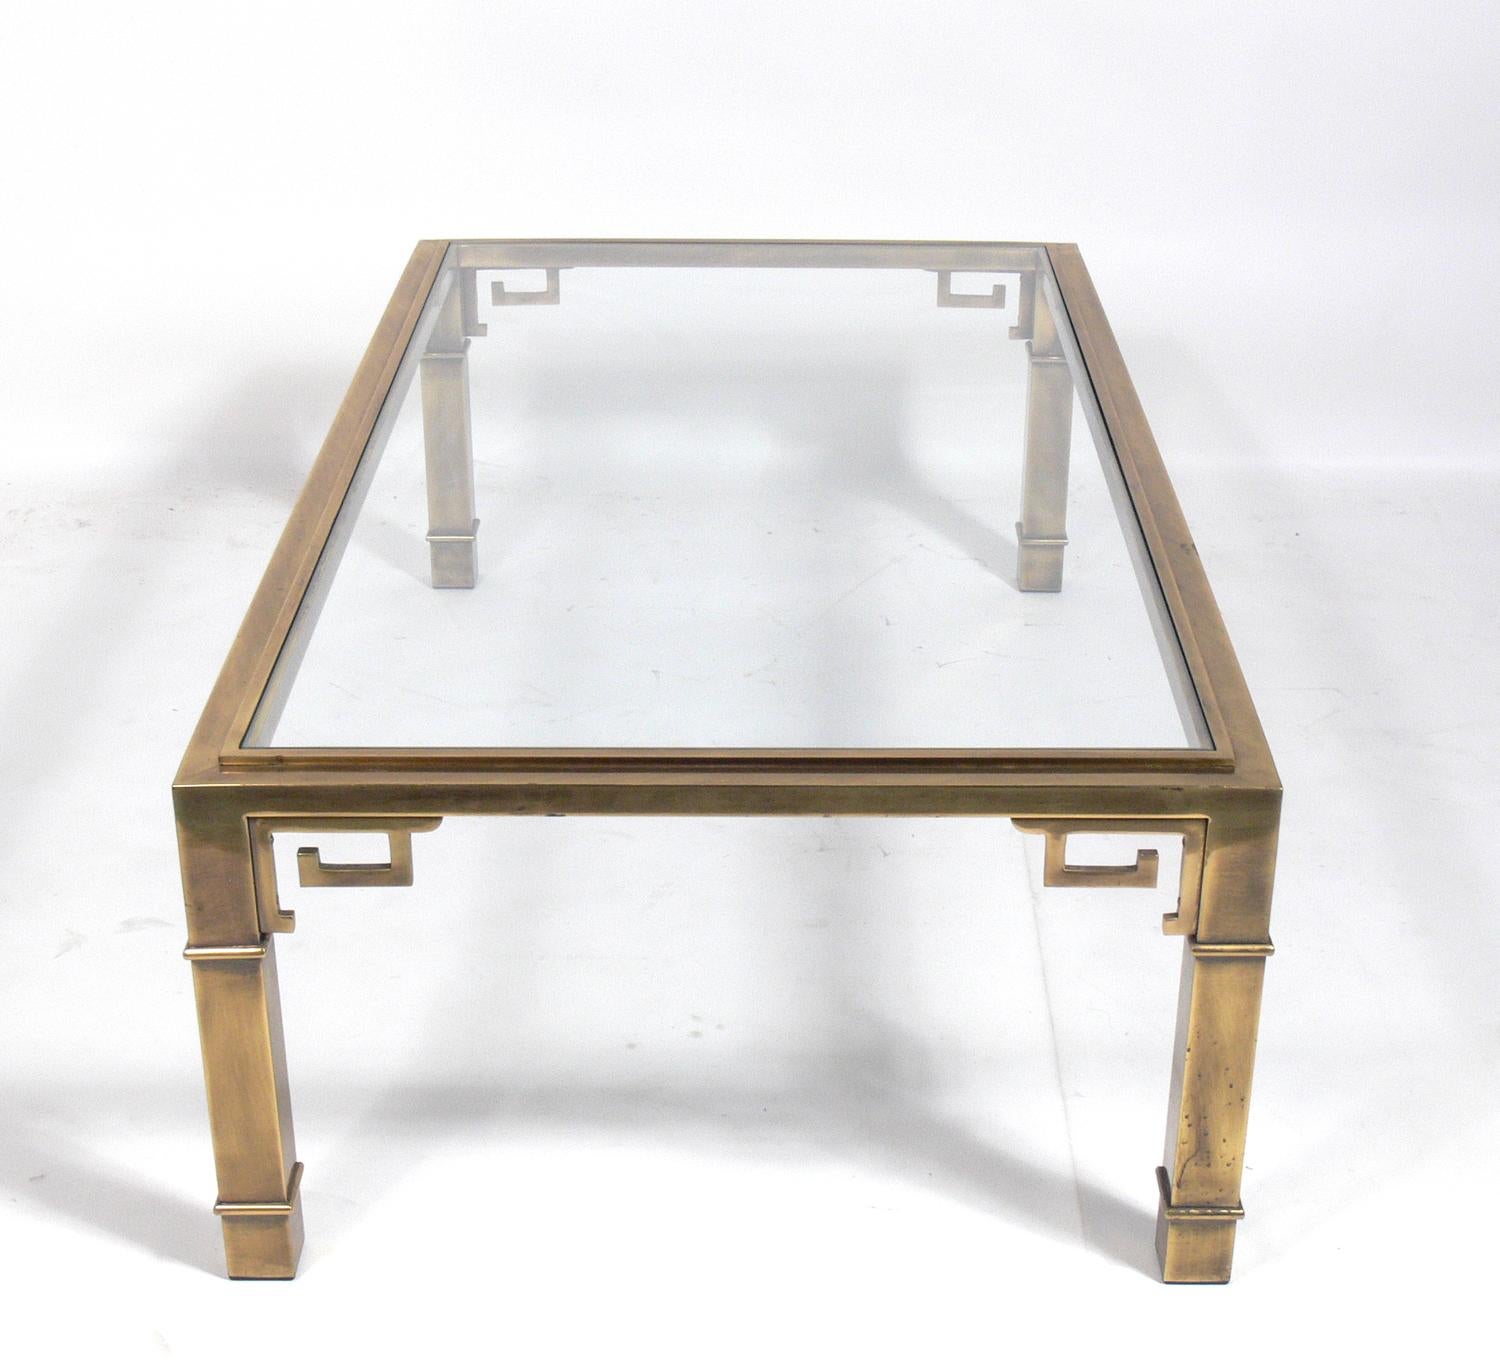 Chinoiserie Asian Influenced Mastercraft Brass Coffee Table